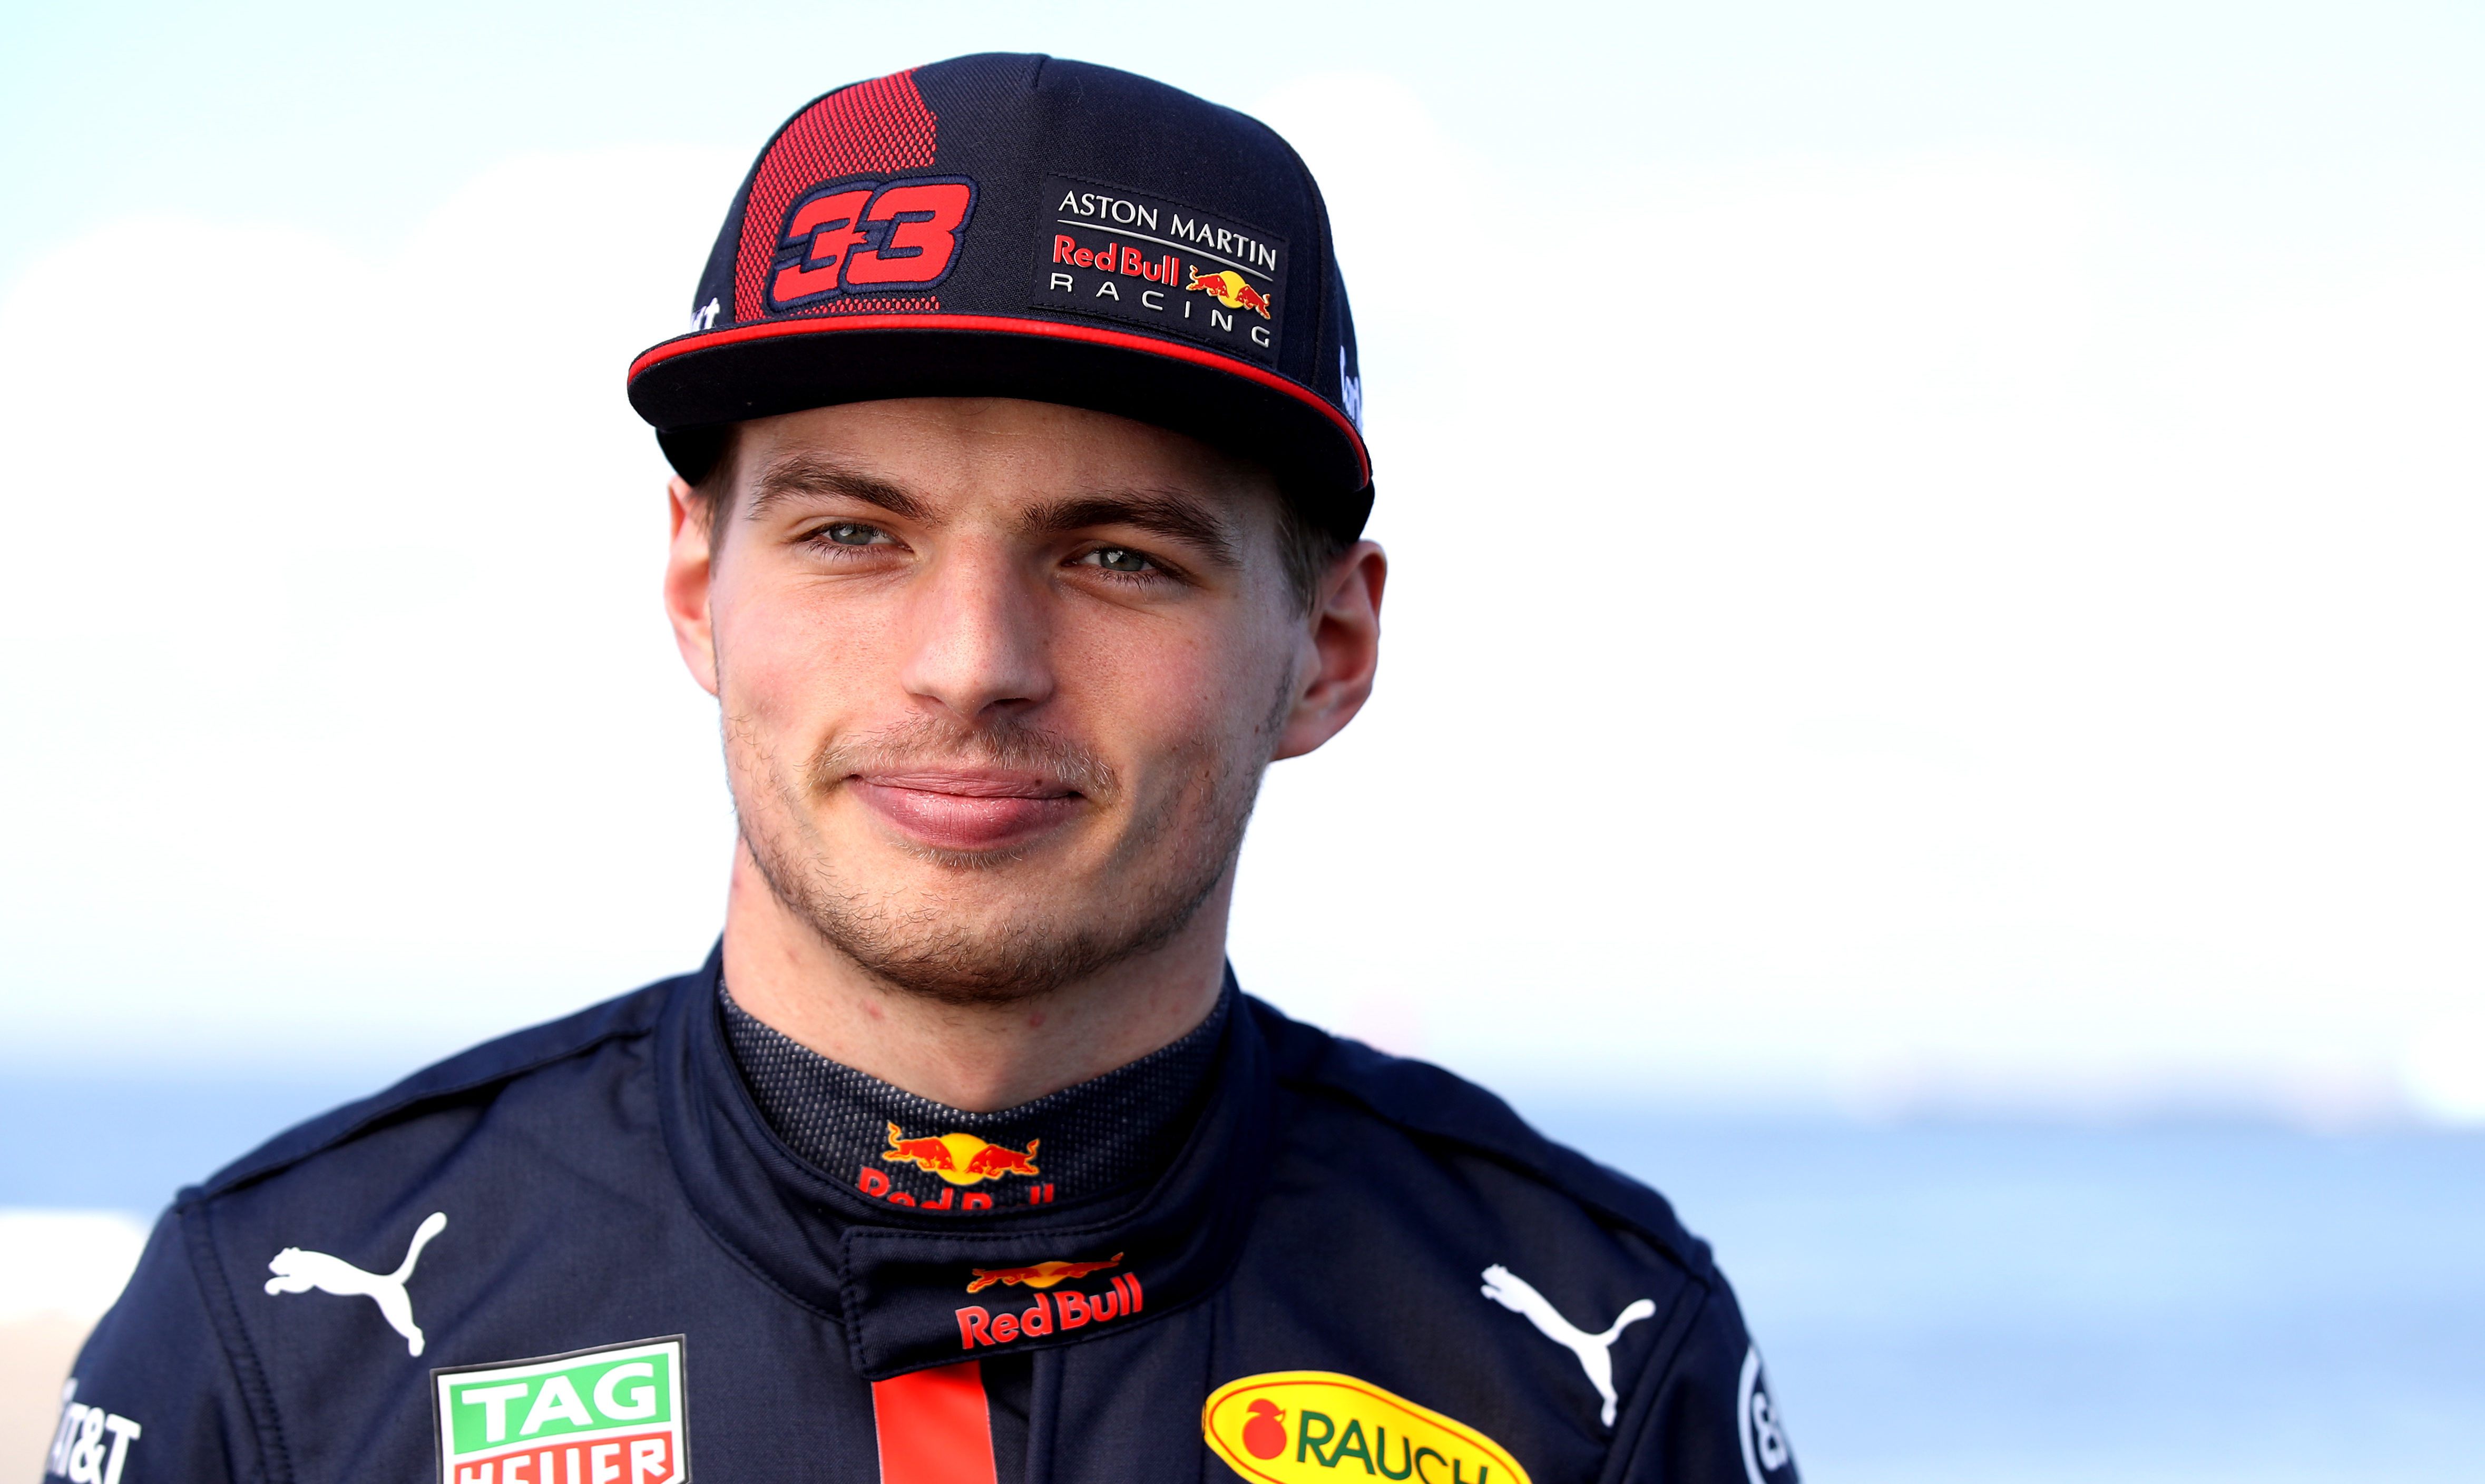 Max Verstappen Makes F1 History With New Red Bull Contract - Boardroom